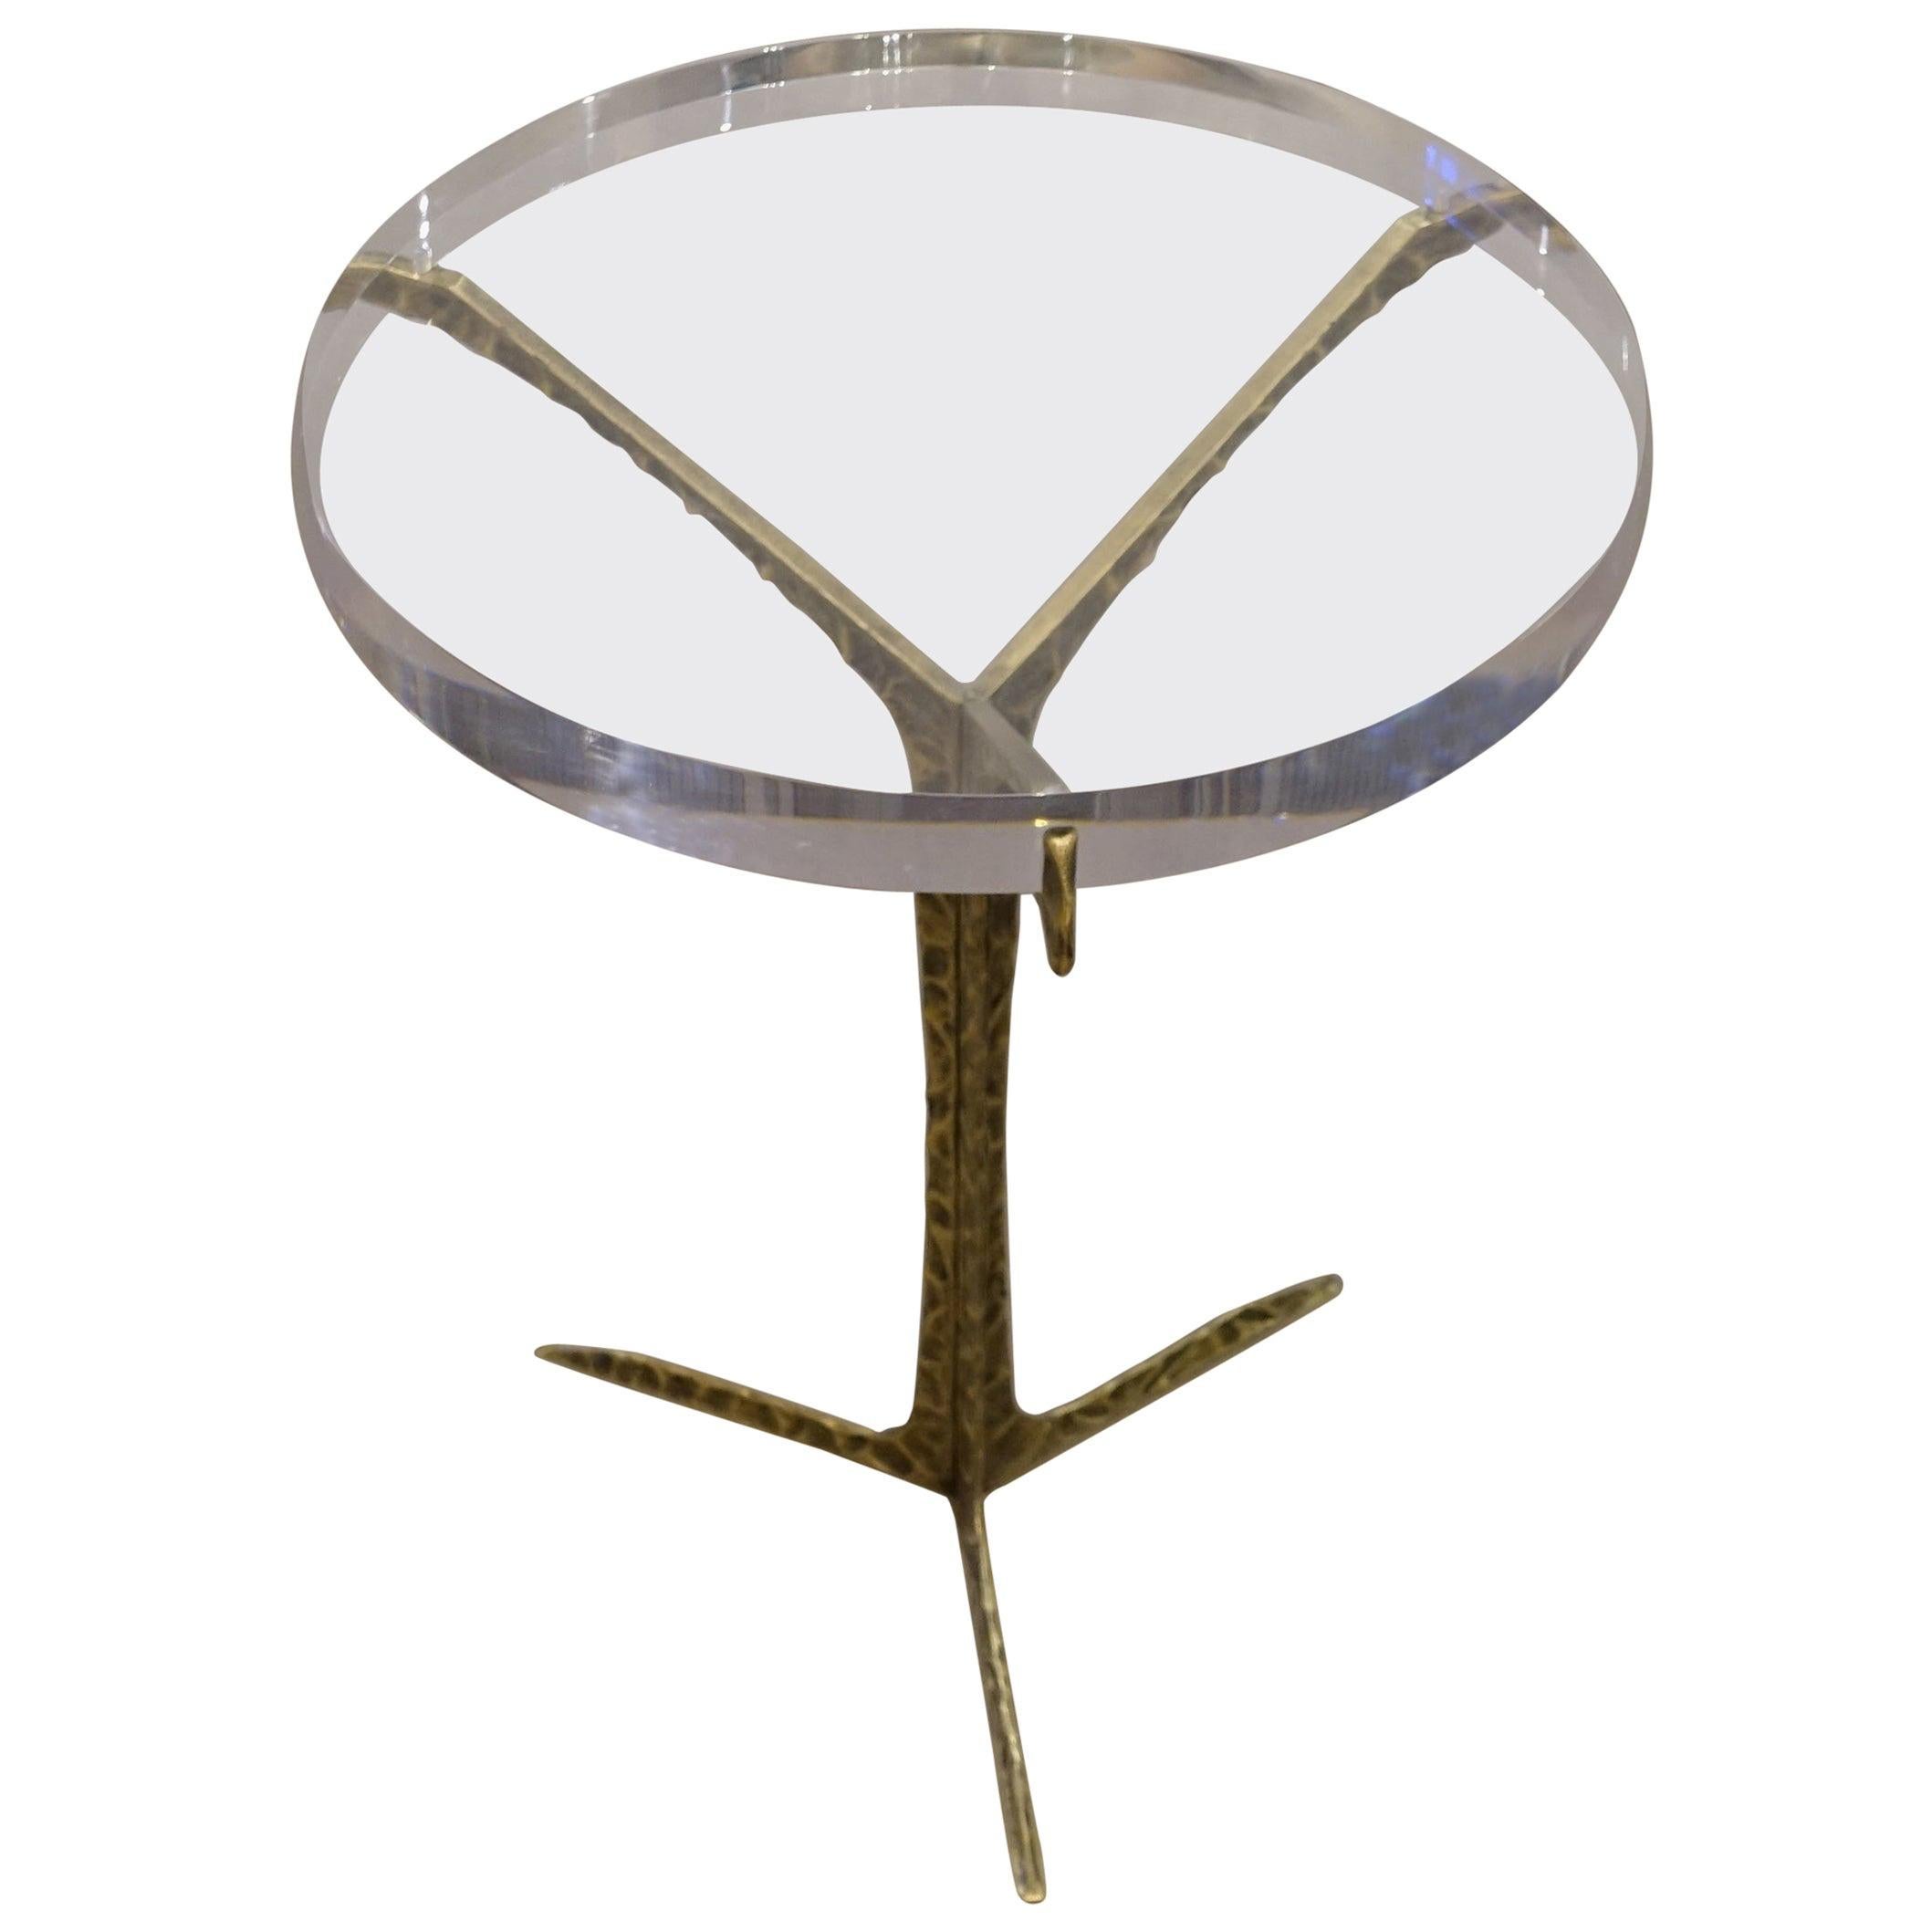 Acrylic Top, Hammered Brass Base Cocktail Table with Portugal, Contemporary